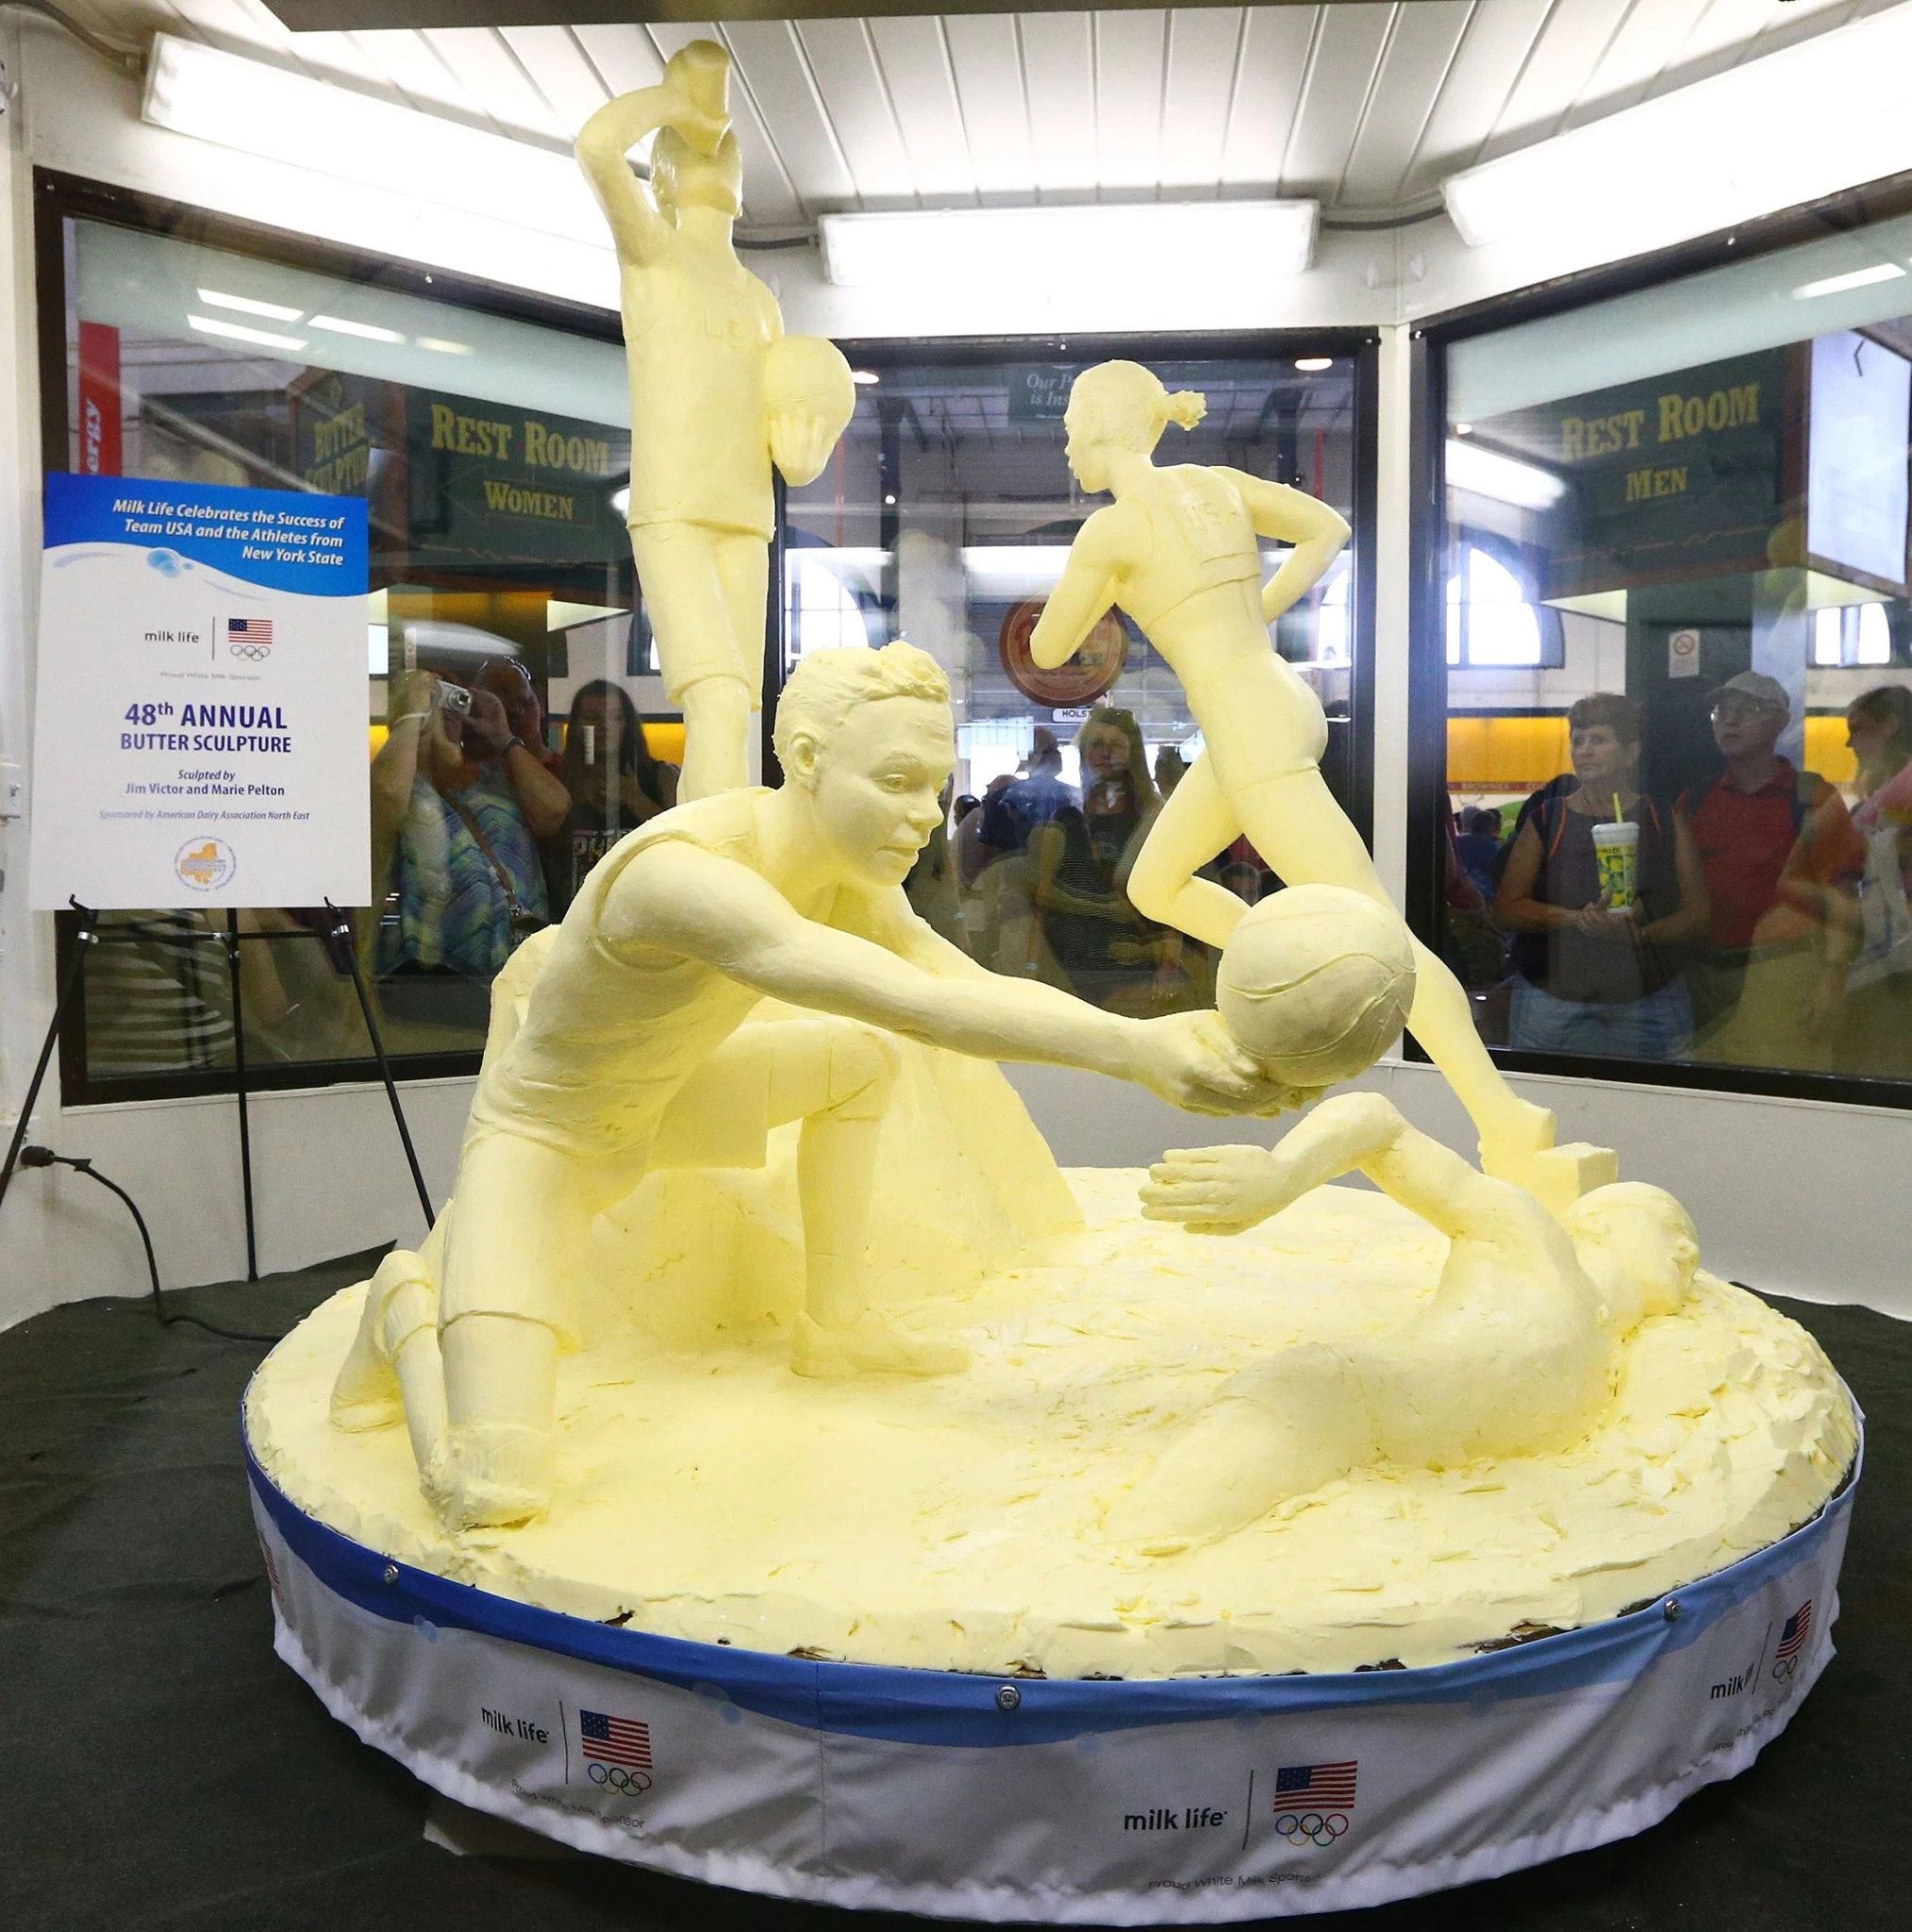 And the NYS Fair 2015 butter sculpture is 